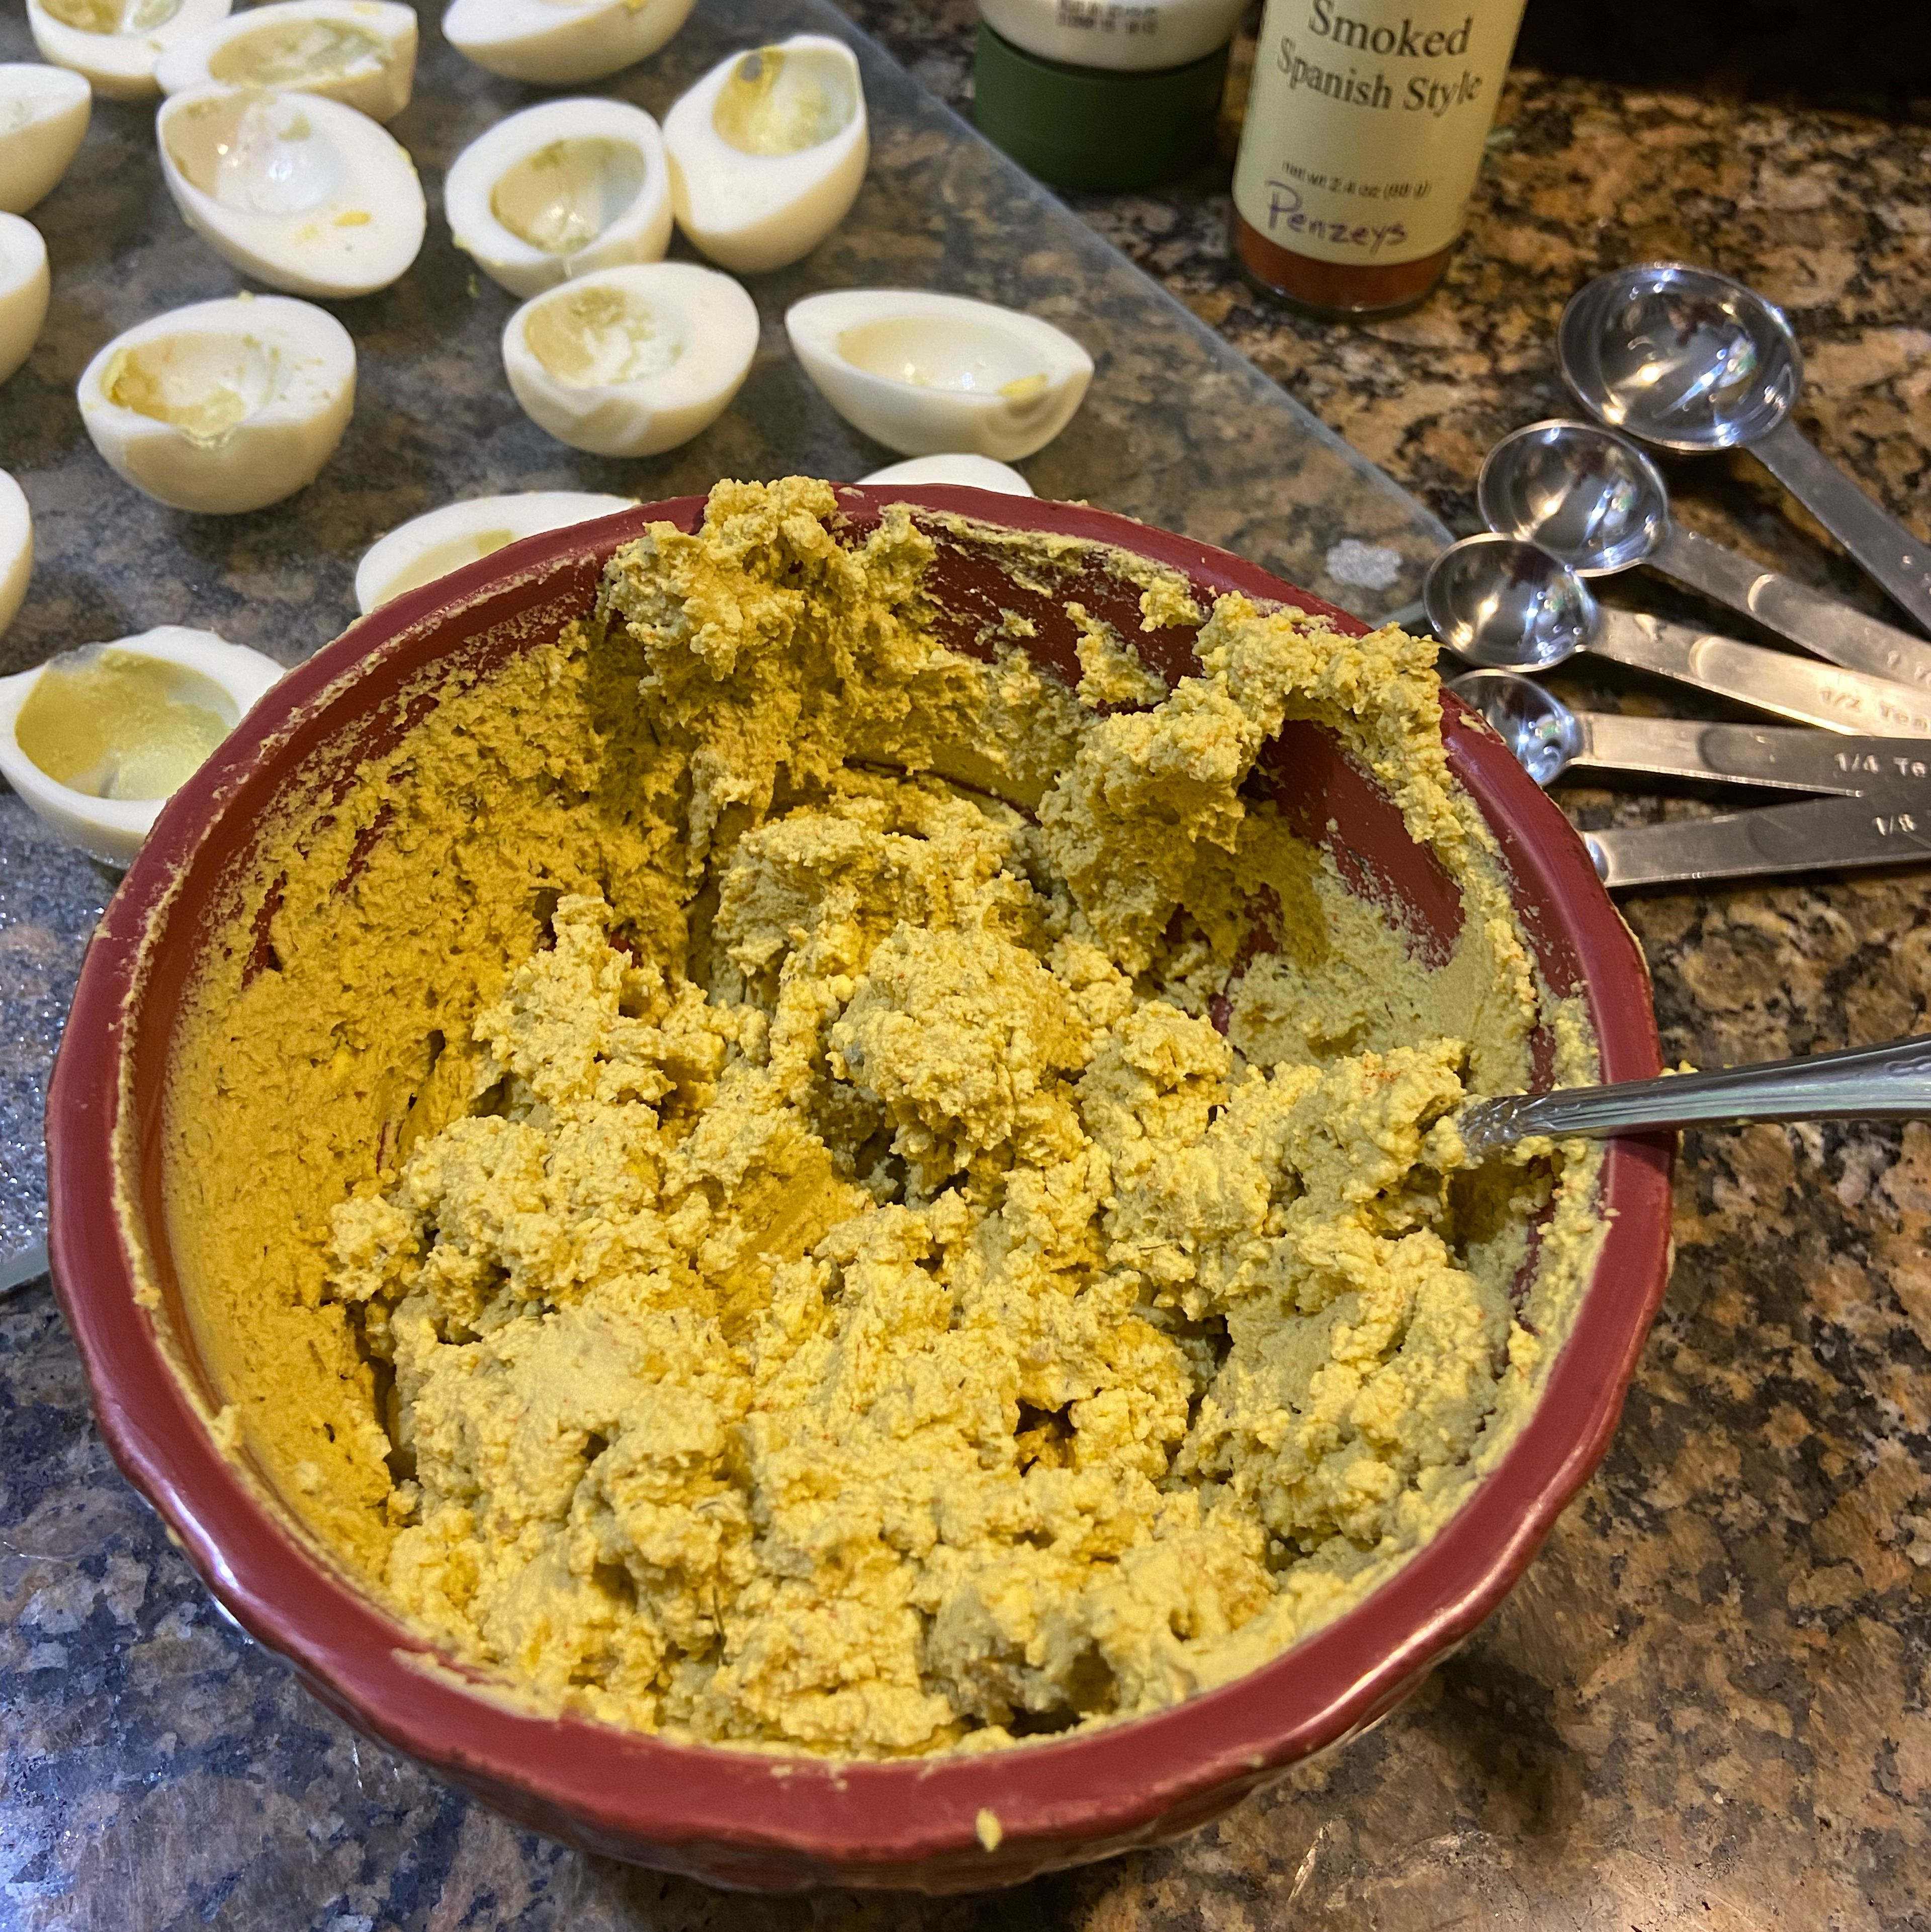 Take a third of the jar of Biltmore’s Champagne dill mustard (3 oz) and mix in with the hard boiled egg yolks. Then add the mayonnaise and half the paprika. Stir until creamy and smooth.